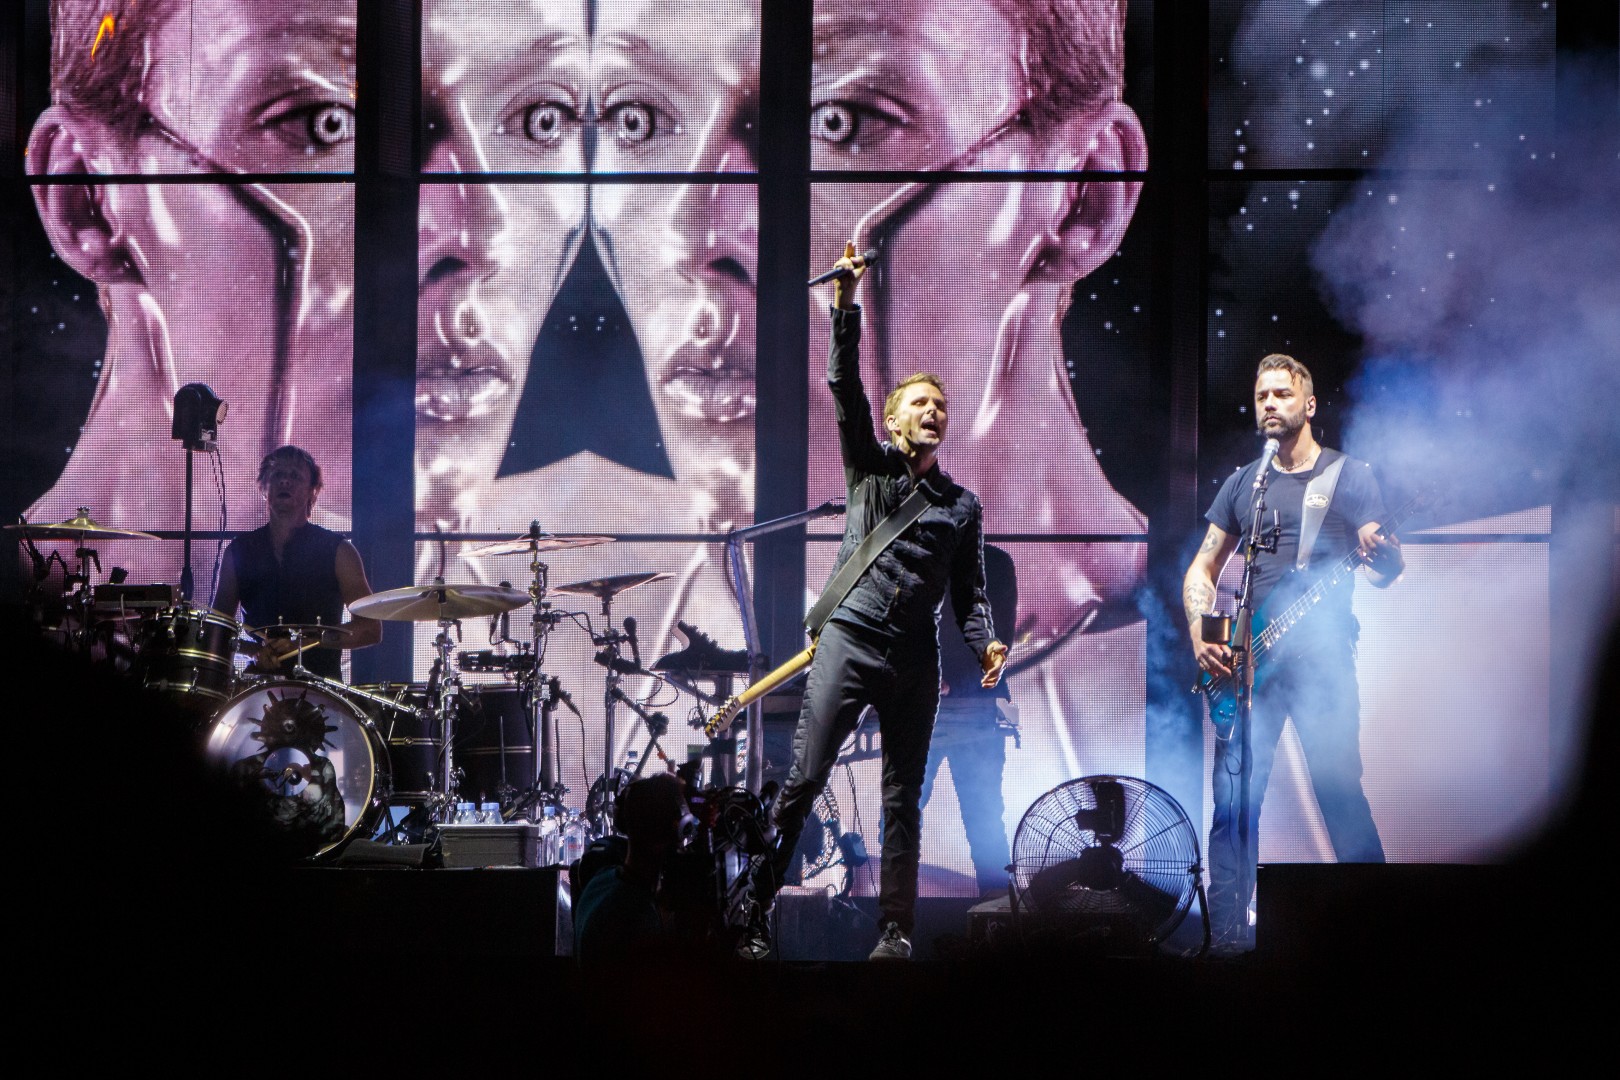 Muse at Piața Constituției in Bucharest on July 29, 2016 (024f99ad99)